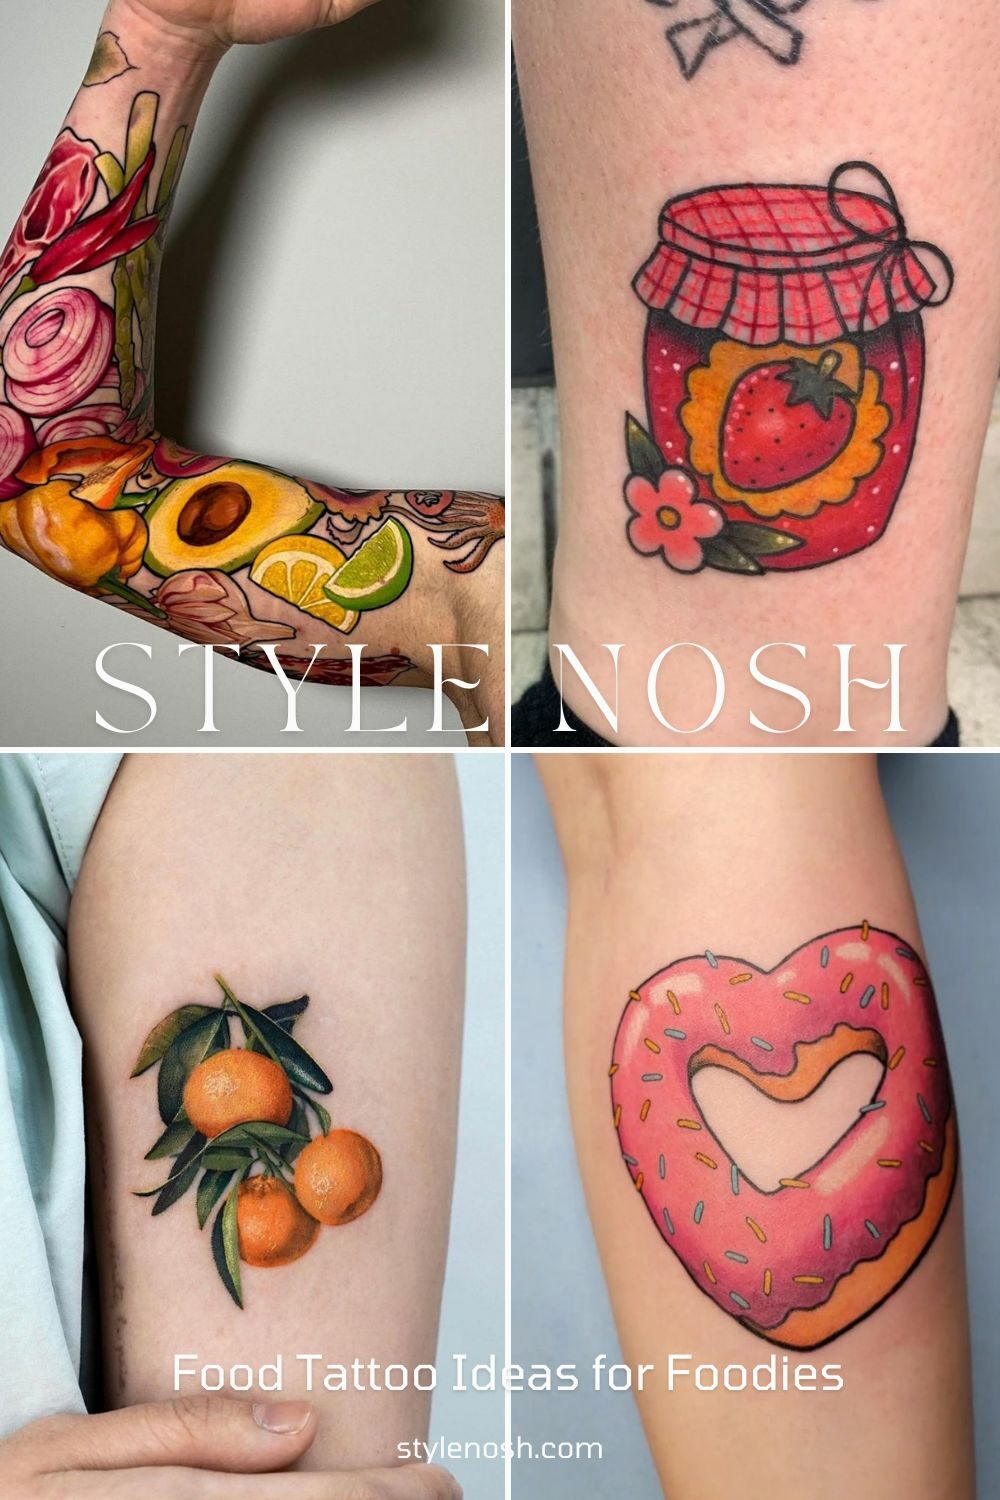 The tattoo of the food looks very cool and the location on the body where it is worn in conjunction with the complexion of the body enhances the overall appearance